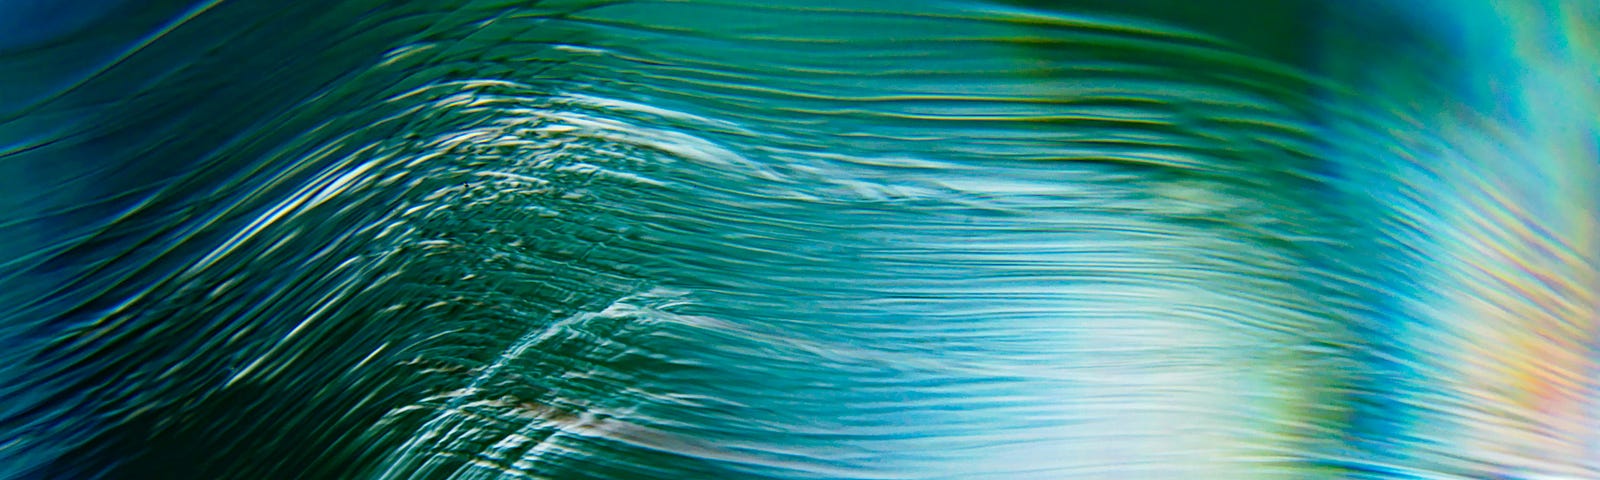 Wavy lines going from left to right against a background in shades of blue